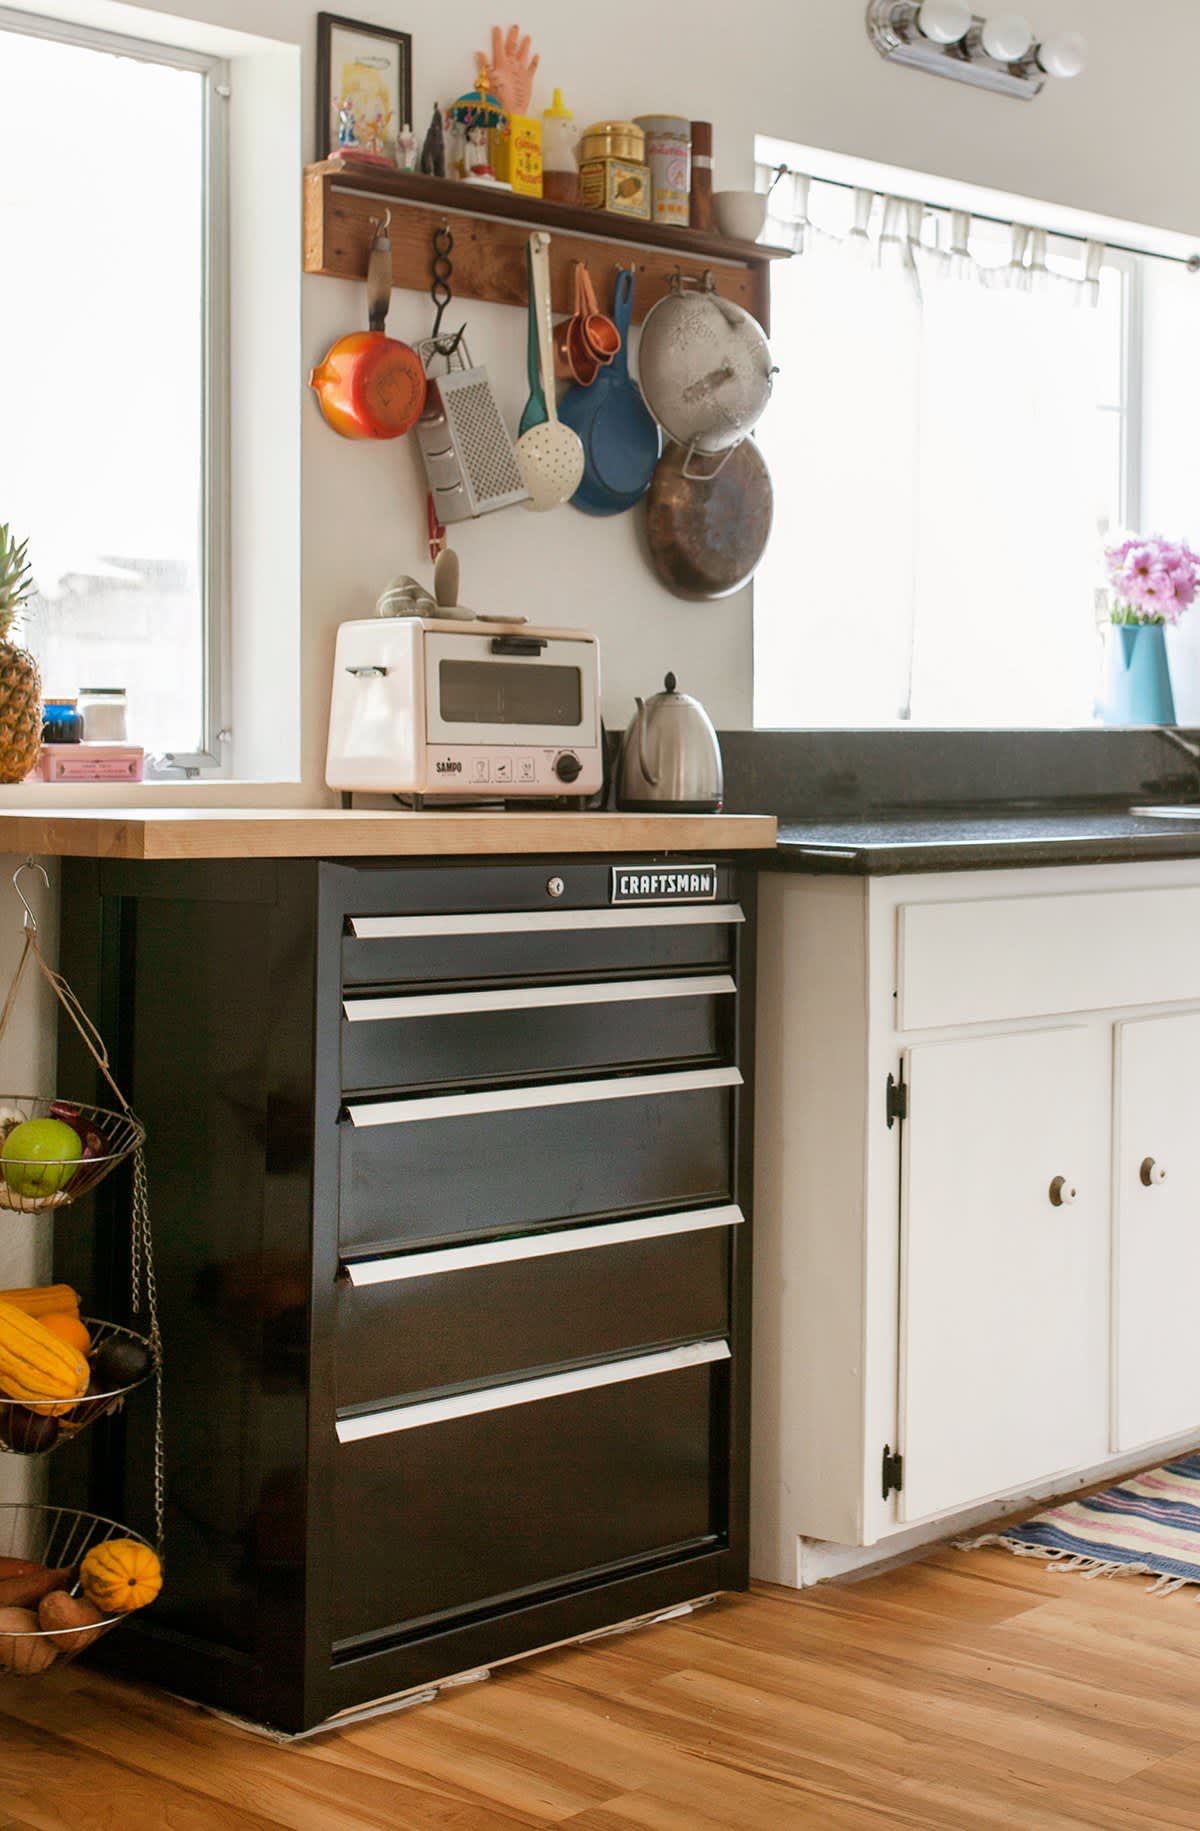 10 Tips to Help You Get More Countertop Space in Your